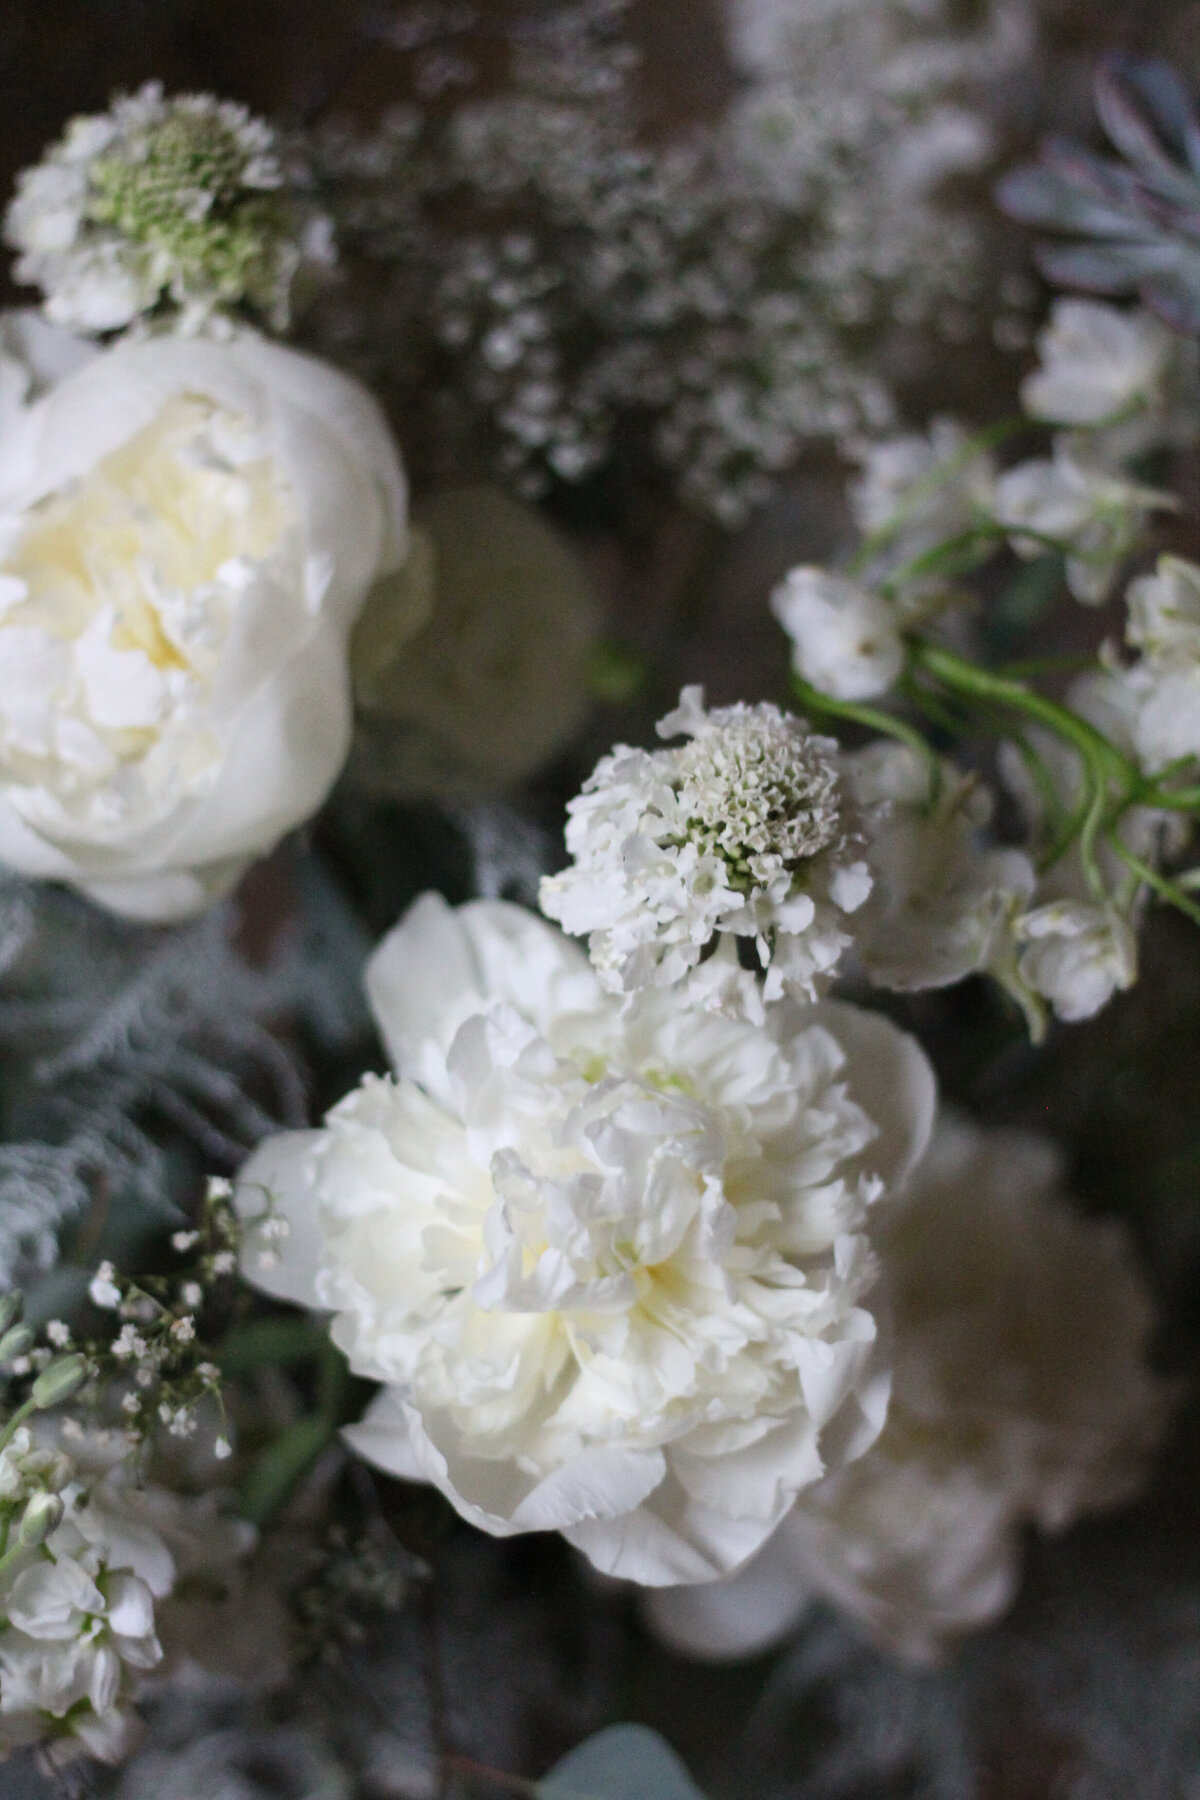 Detail of white peonies and scabiosa in a wedding welcome arrangement